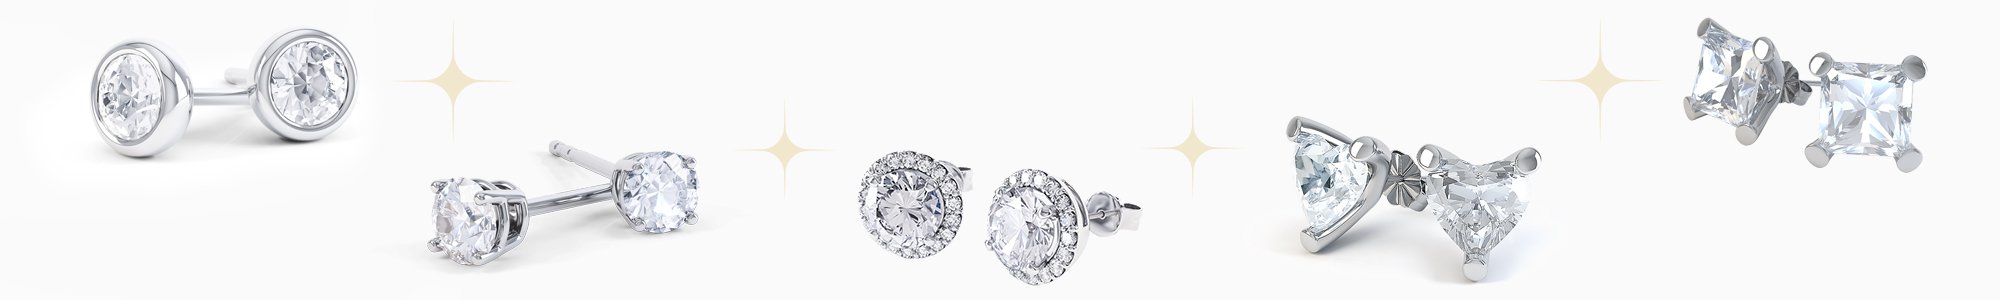 Shop Silver Earrings by Jian London. Buy direct and save from our wide selection of Silver Earrings at the Jian London jewellery Store. Free UK Delivery